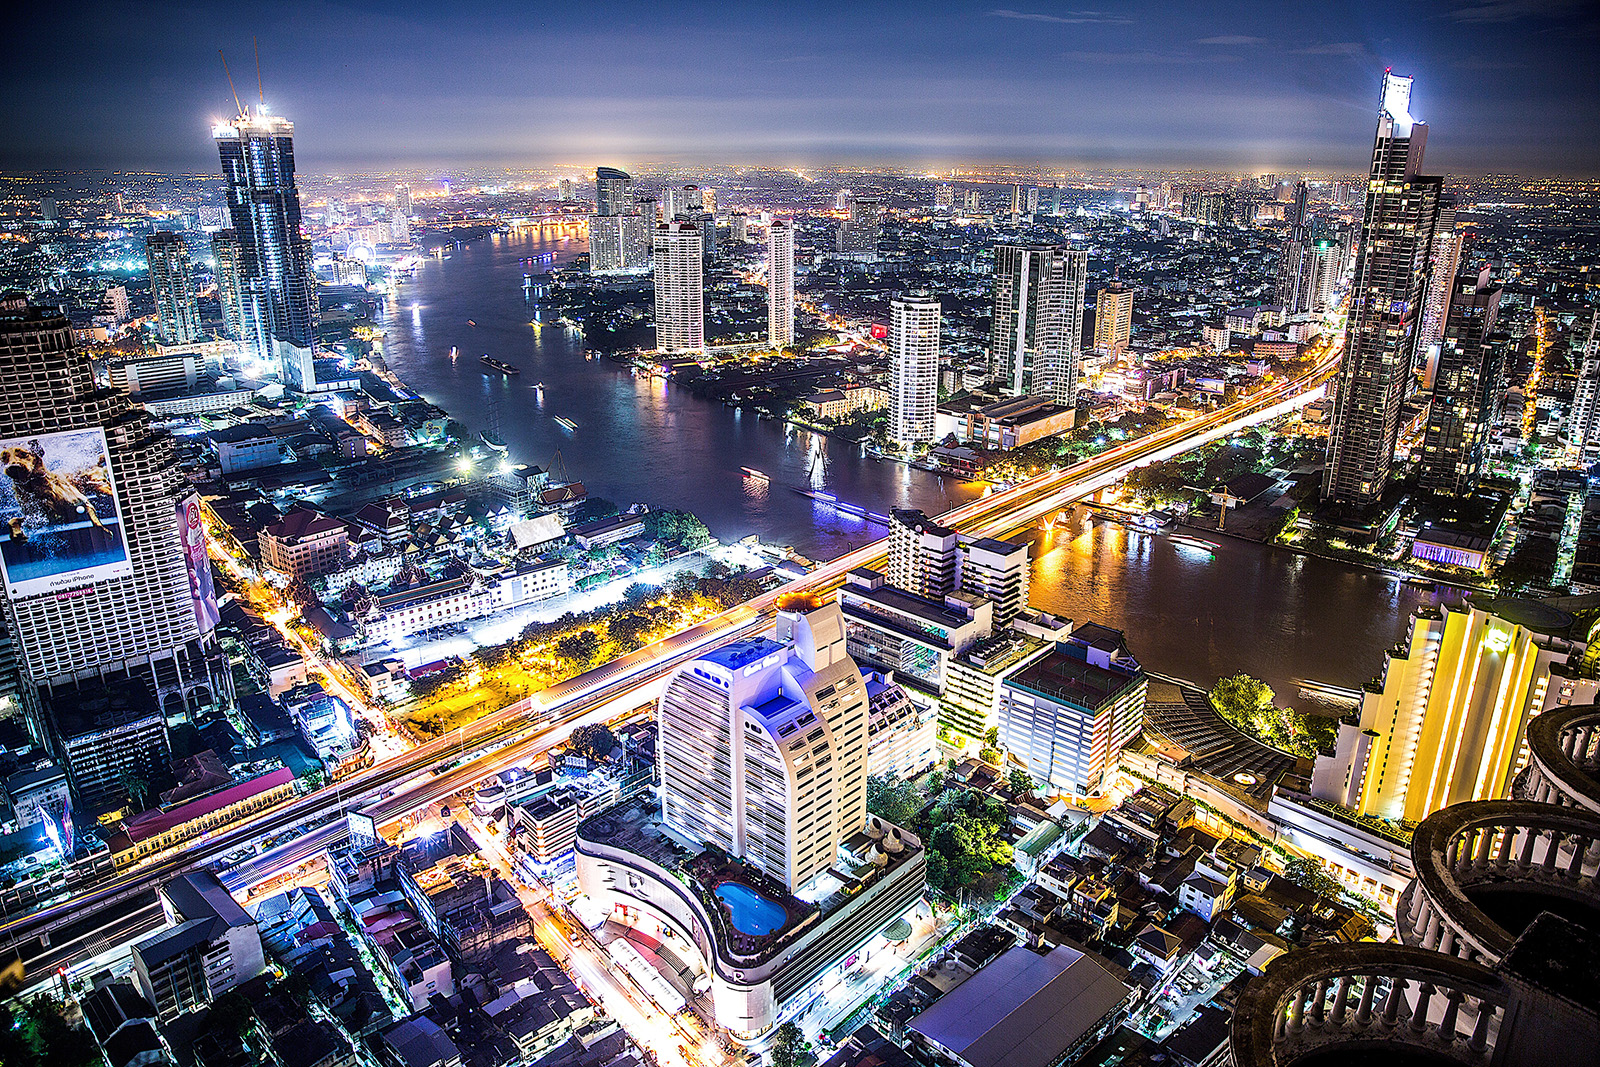 Aerial view of Bangkok, Thailand, at night. Photo by Braden Jarvis/Unsplash/Creative Commons